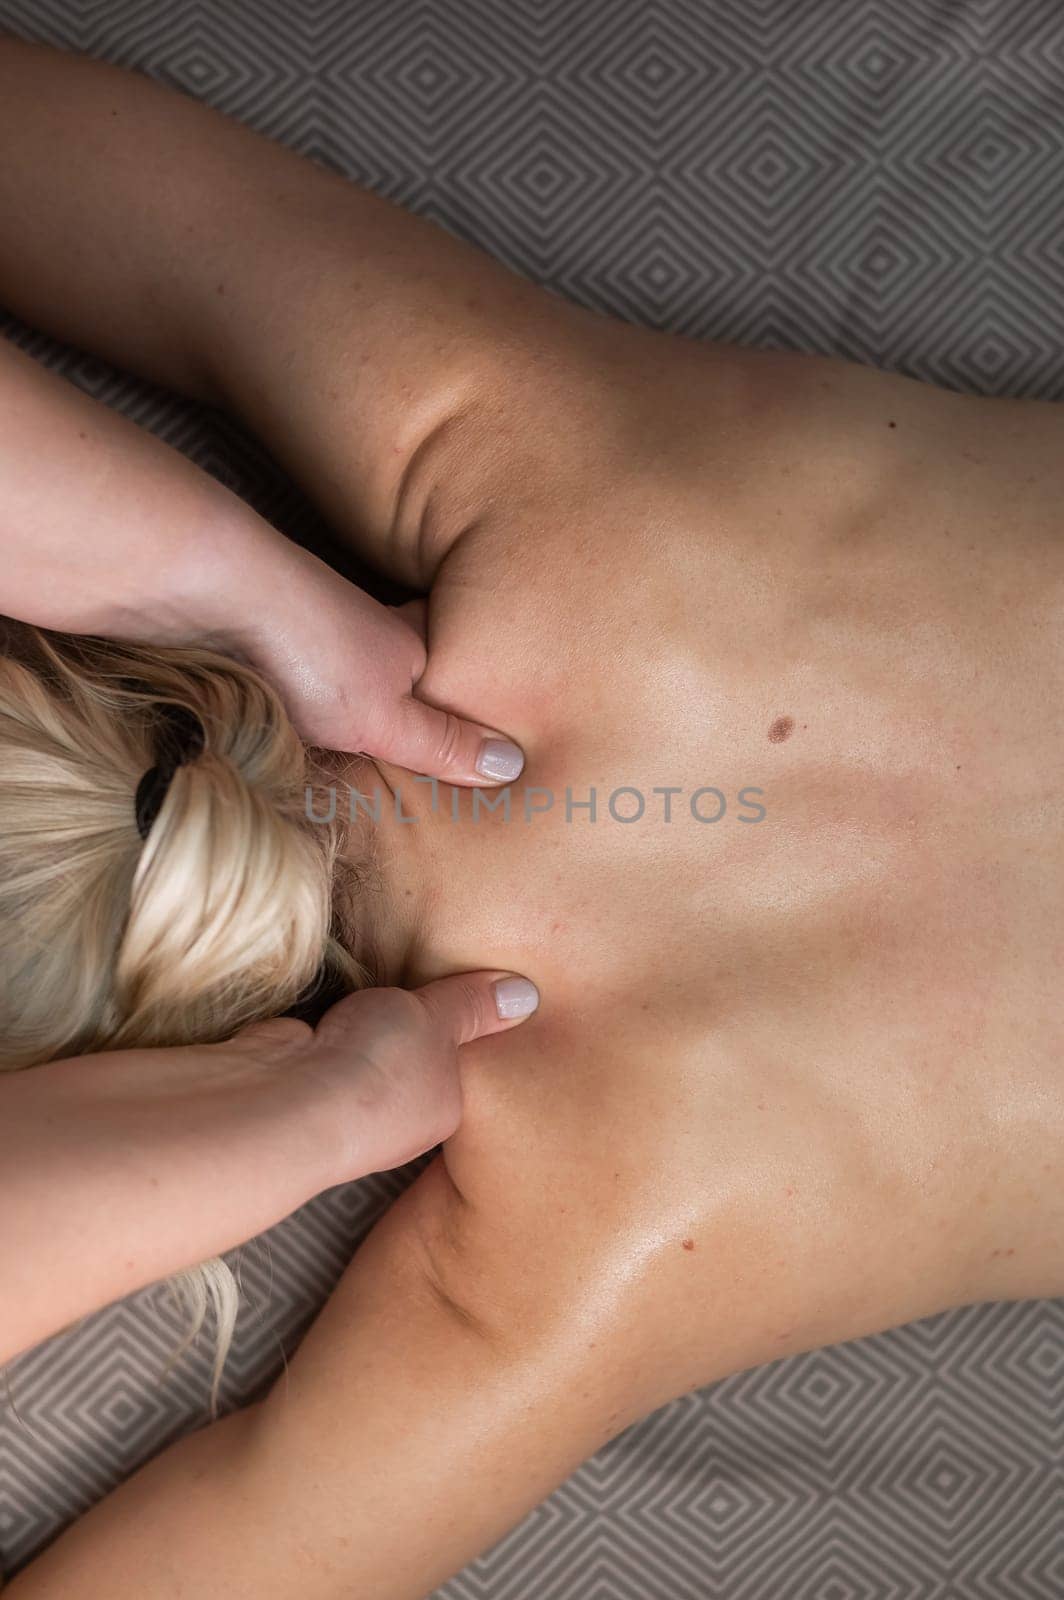 Top view of a woman undergoing a cervical-neck massage. Vertical photo